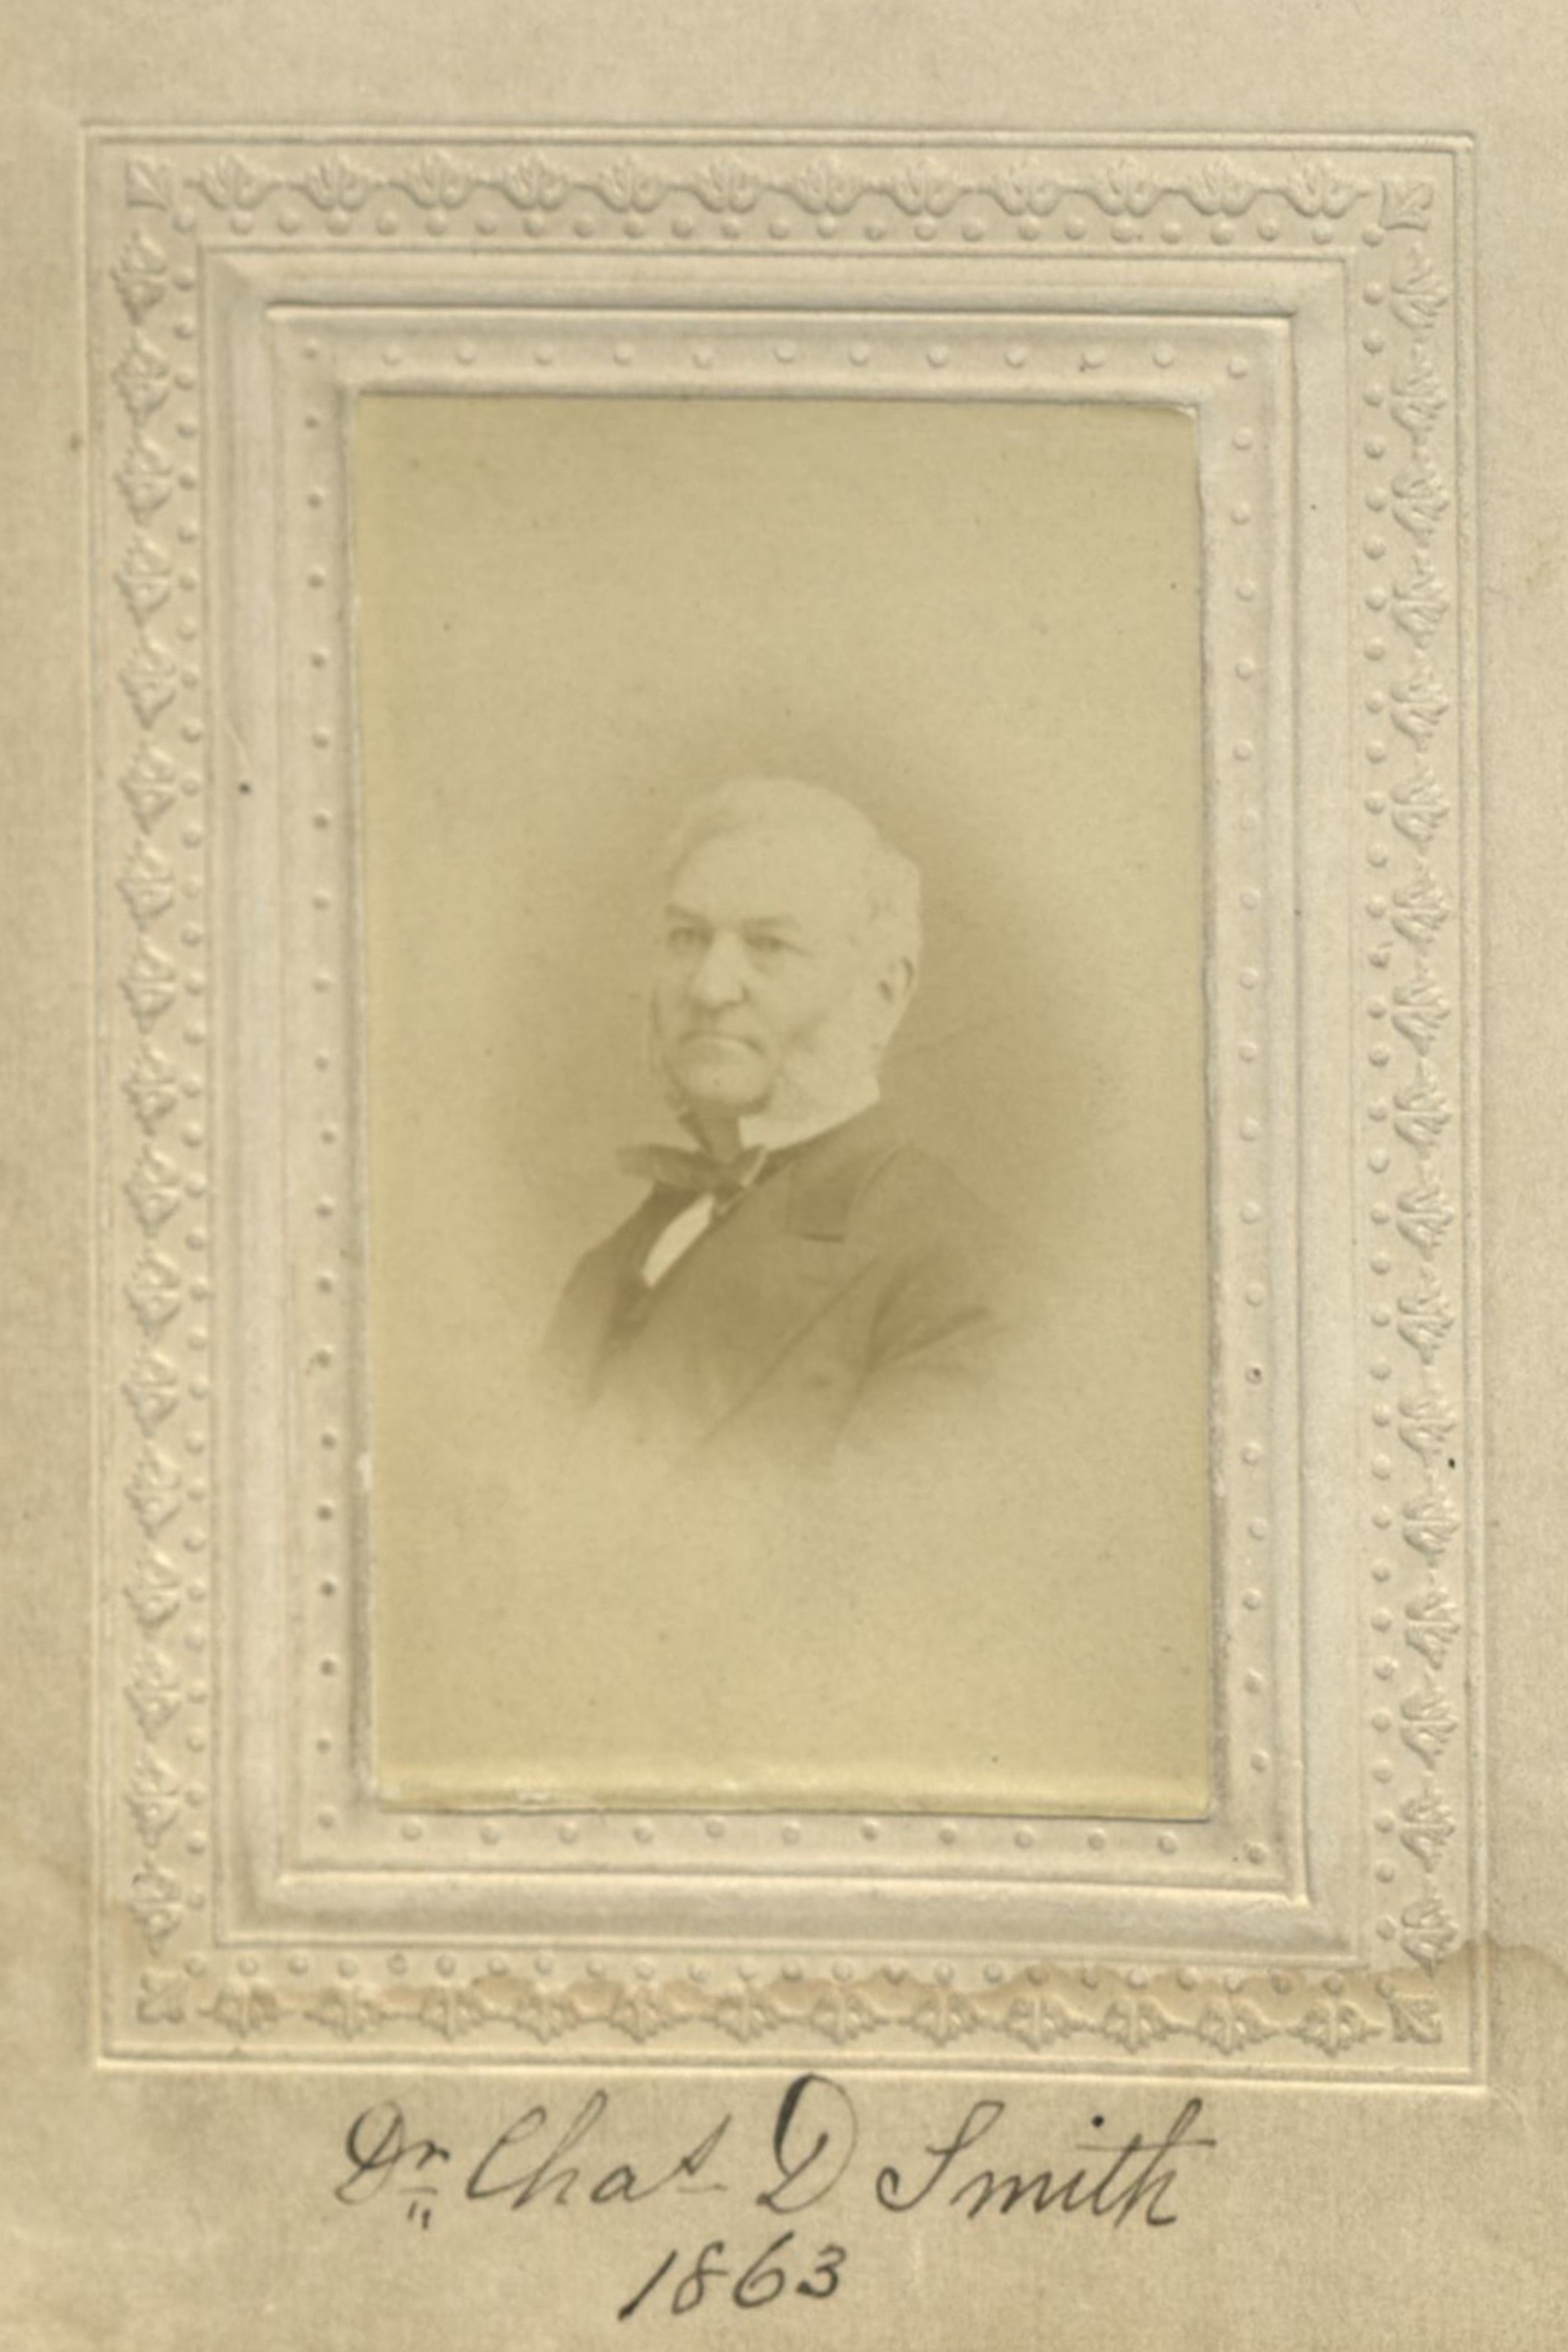 Member portrait of Charles D. Smith